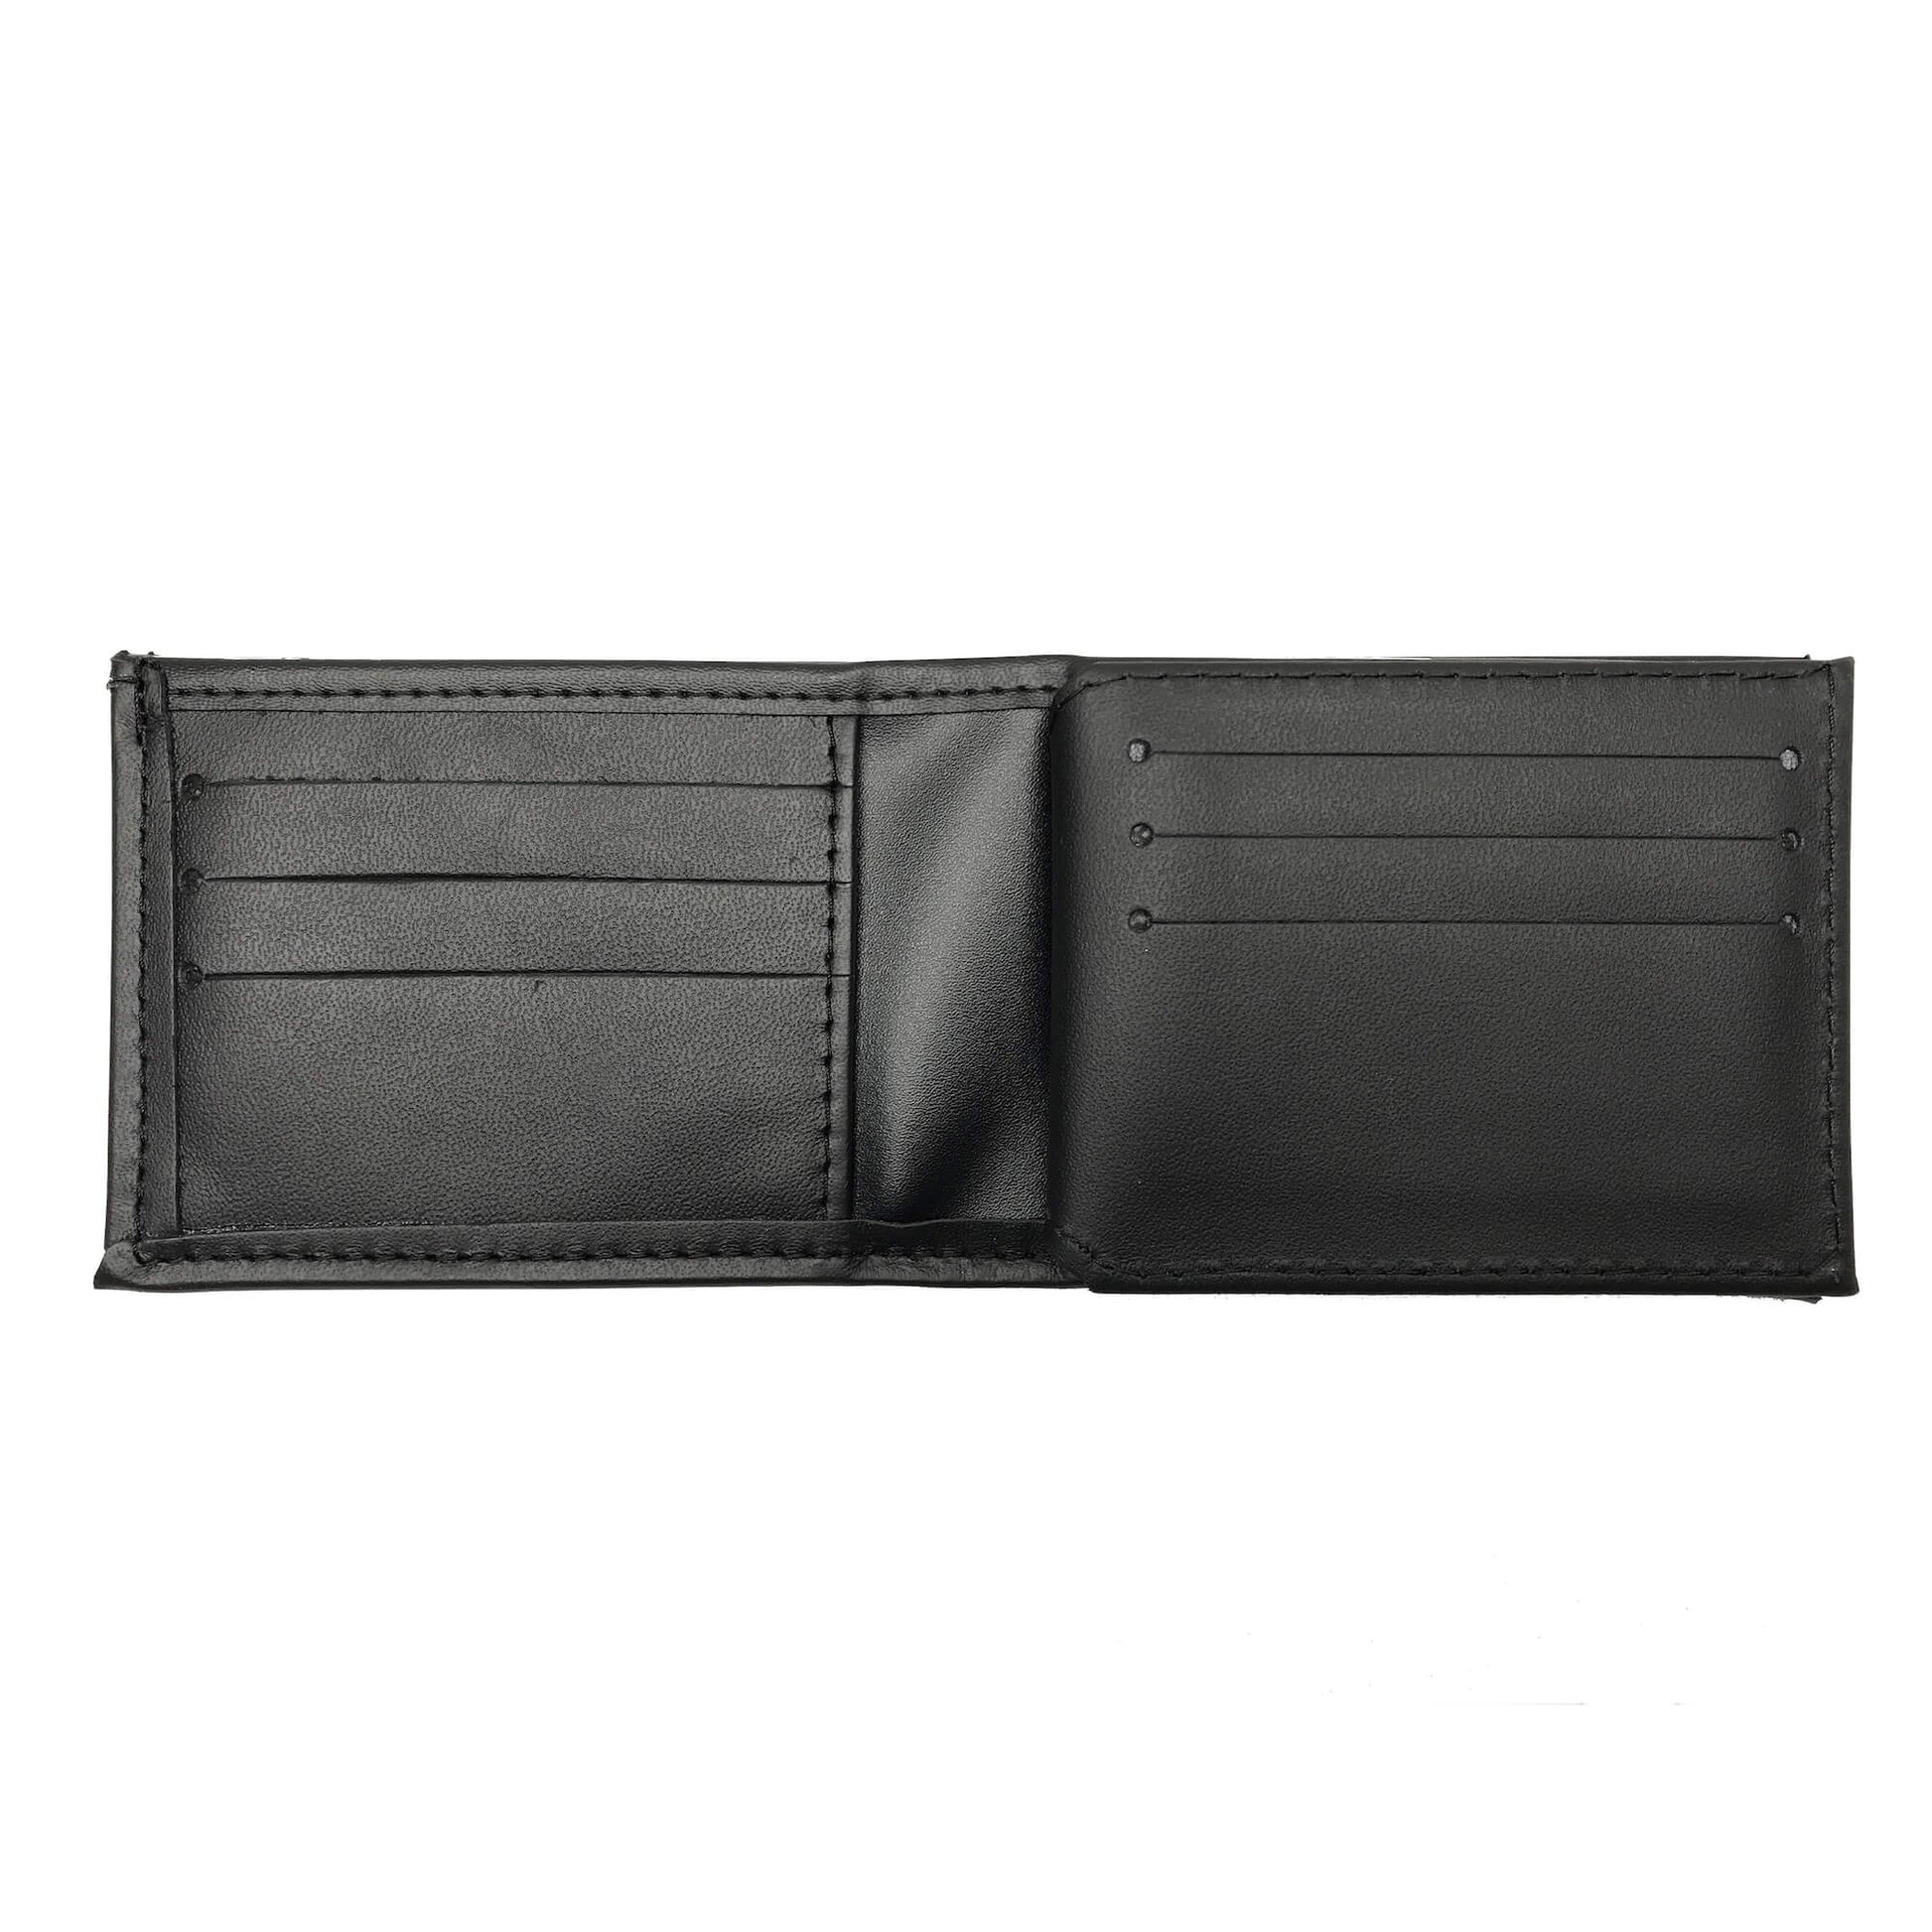 U.S. Customs and Border Protection (CBP) Horizontal Bifold Hidden Badge Wallet-Perfect Fit-911 Duty Gear USA